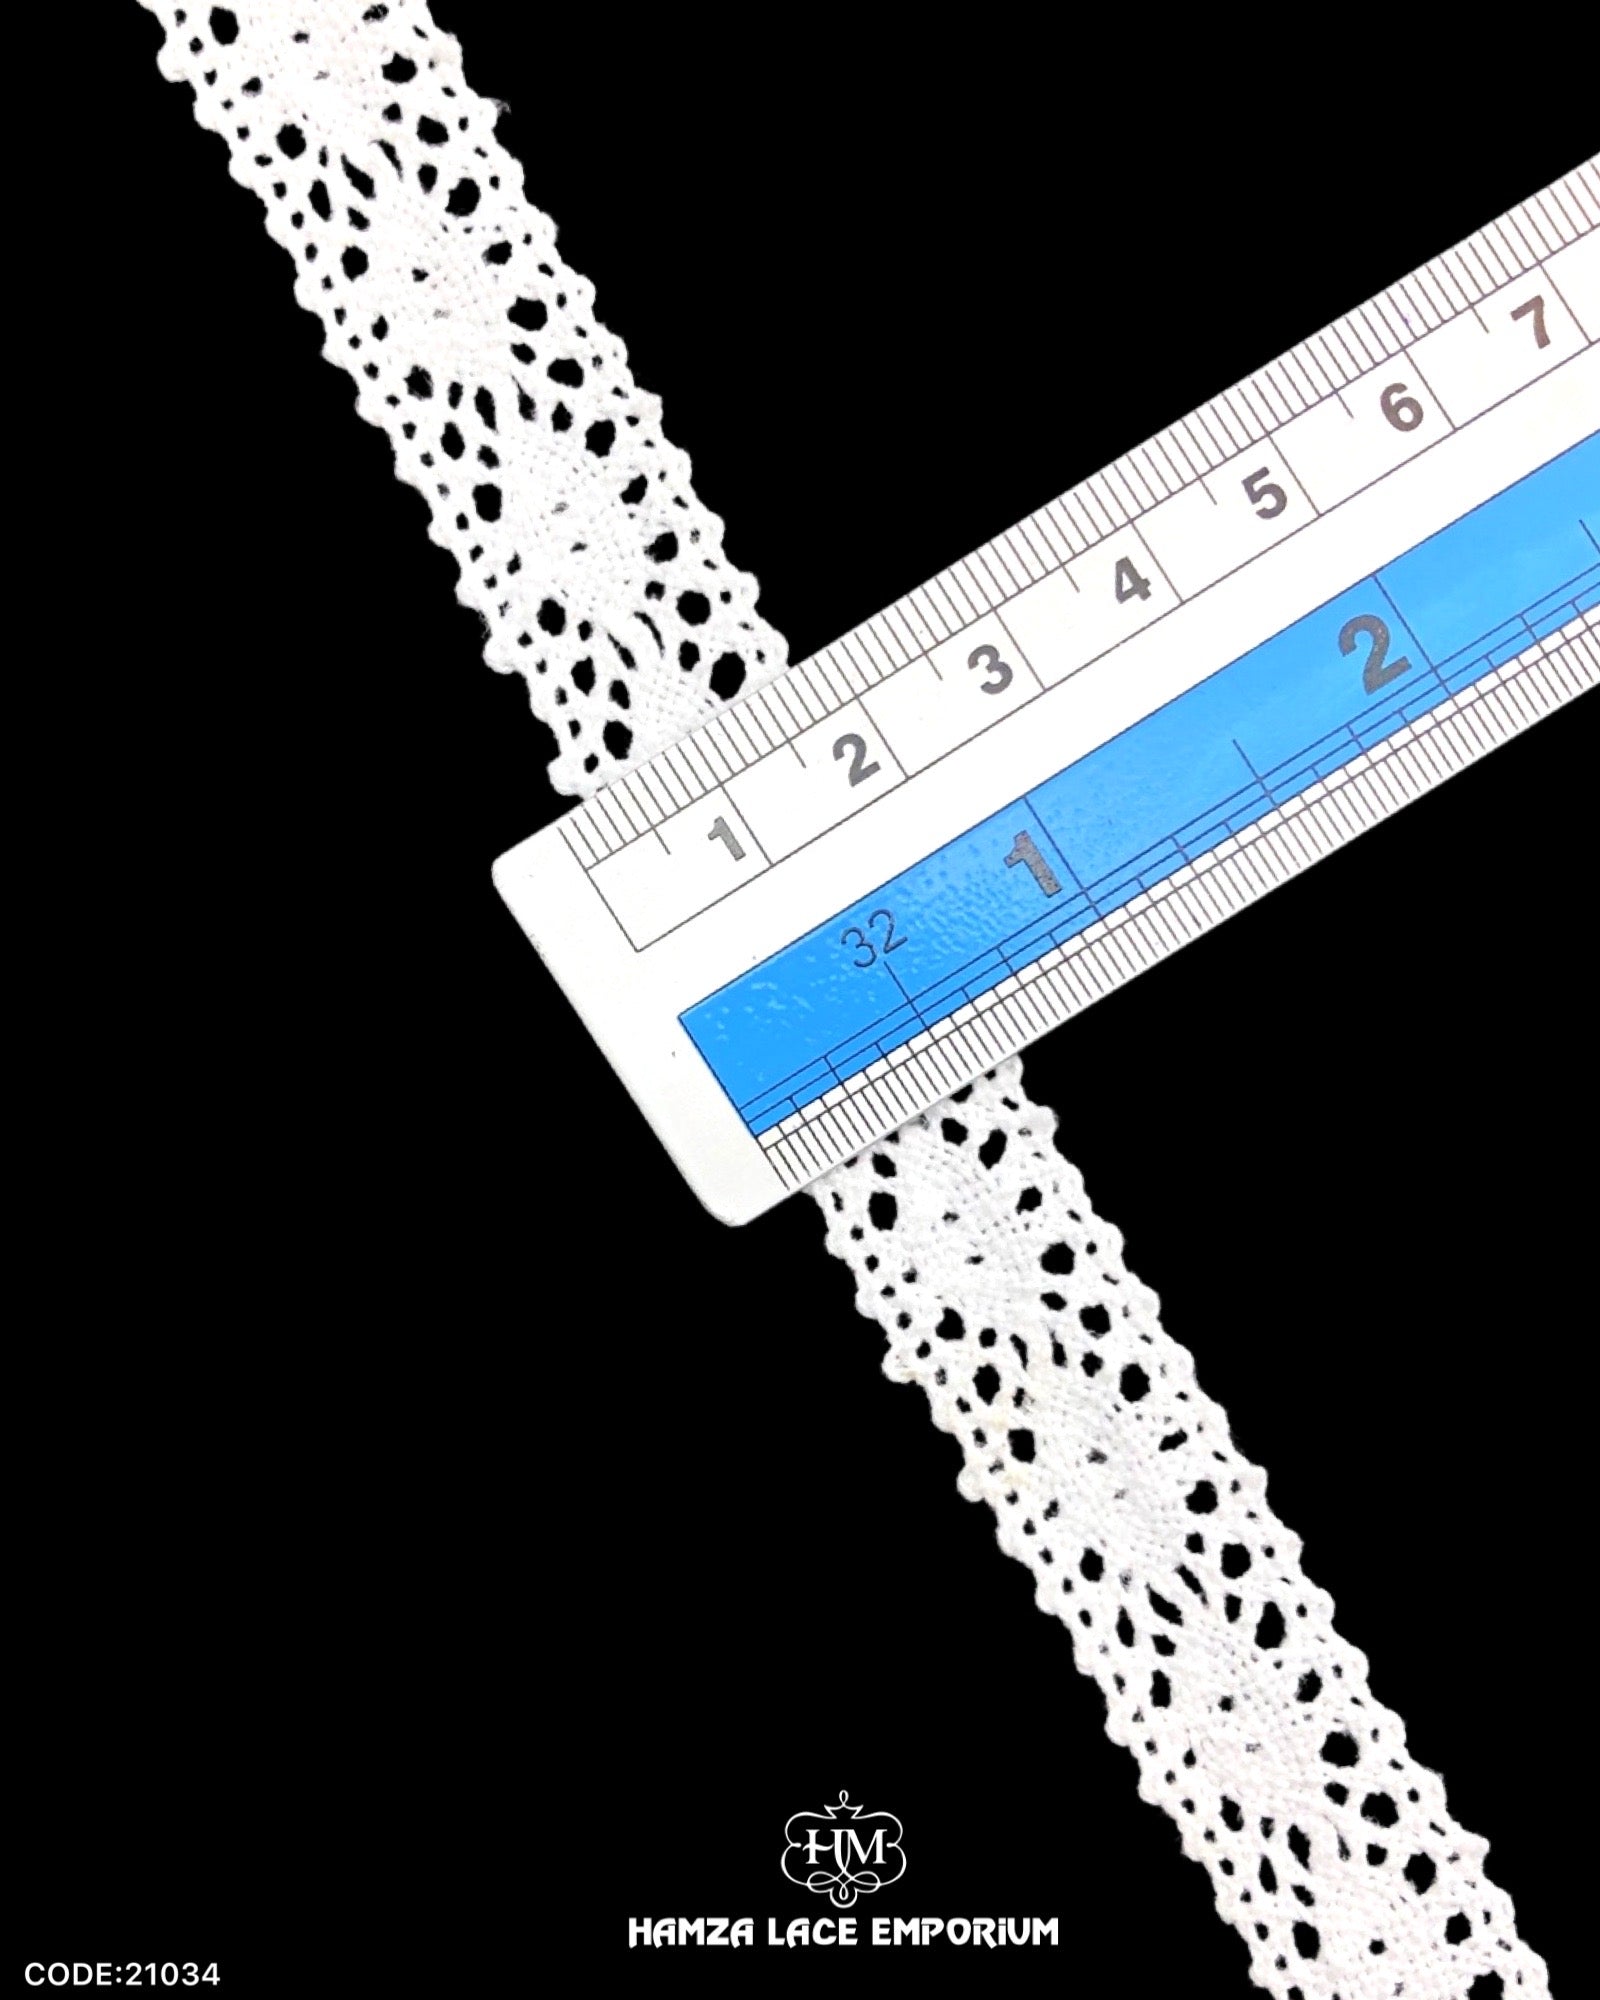 Size of the 'Center Filling Crochet Lace 21034' is shown with the help of a ruler as '0.5' inches